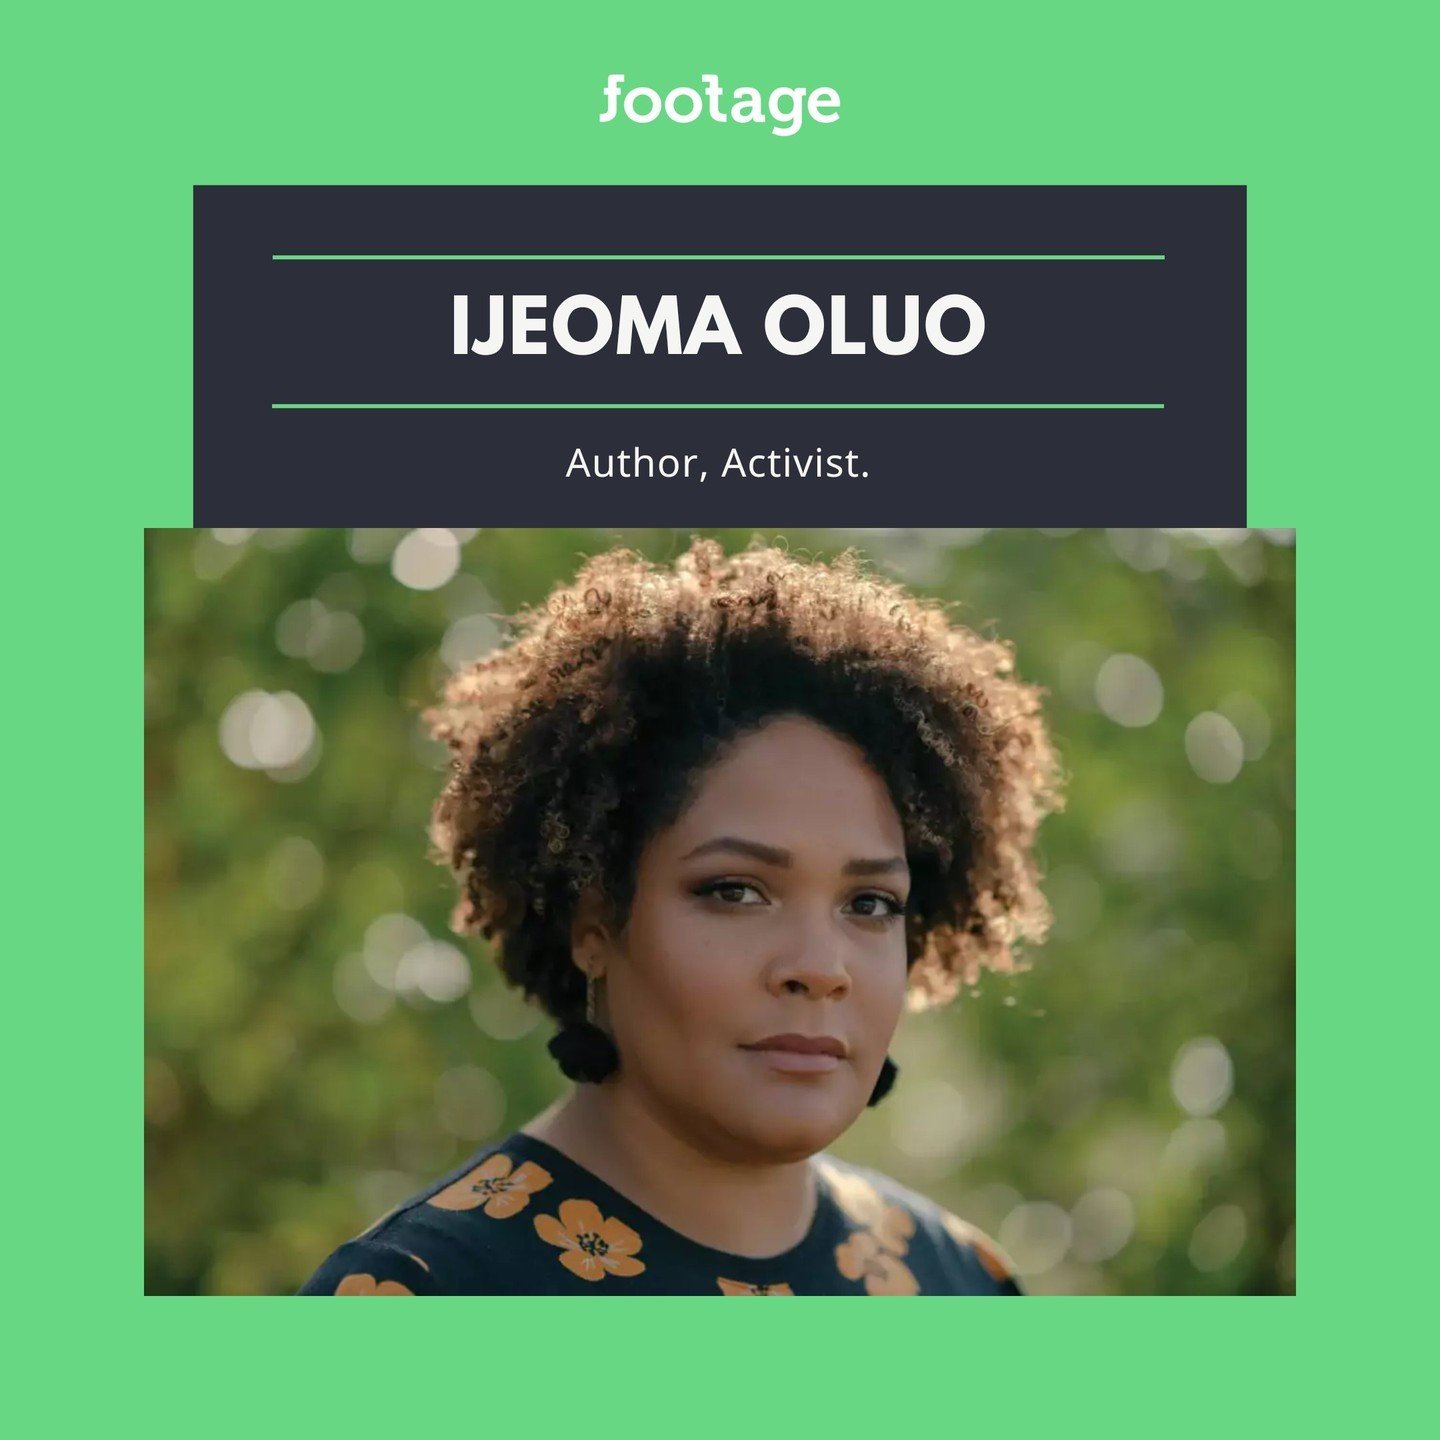 Ijeoma Oluo, a leading voice in contemporary feminism and racial justice, fearlessly tackles systemic oppression through her powerful writing. As an award-winning author, she illuminates the intersectionality of race, gender, and class, inspiring rea